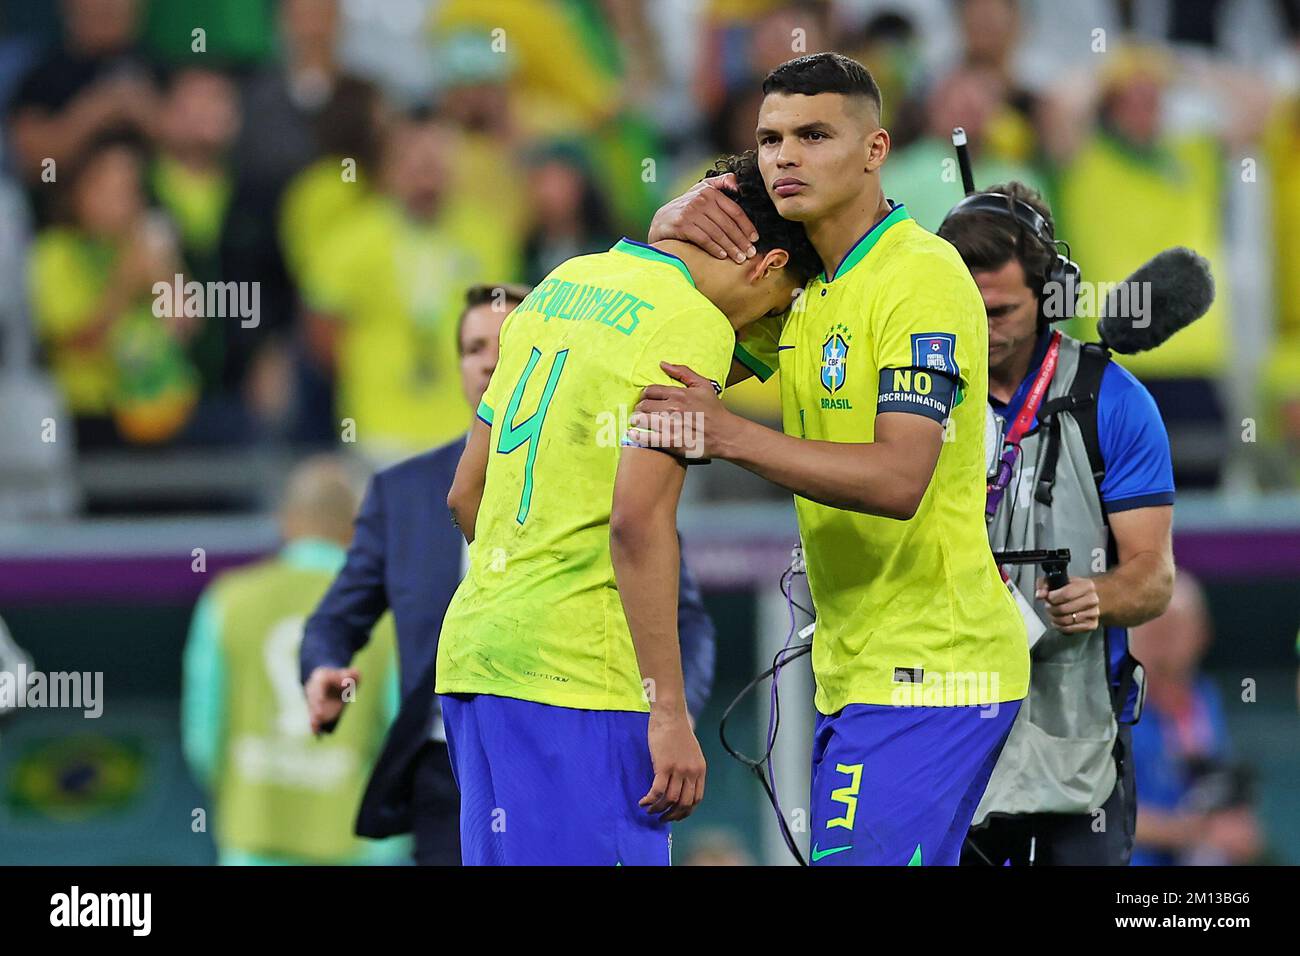 Doha, Qatar. 09th Dec, 2022. Marquinhos and Thiago Silva from Brazil, regret the elimination after the match between Croatia and Brazil, for the quarterfinals of the FIFA World Cup Qatar 2022, Education City Stadium this Friday 09. Photo: Heuler Andrey/DiaEsportivo 30761 (Heuler Andrey/SPP) Credit: SPP Sport Press Photo. /Alamy Live News Stock Photo